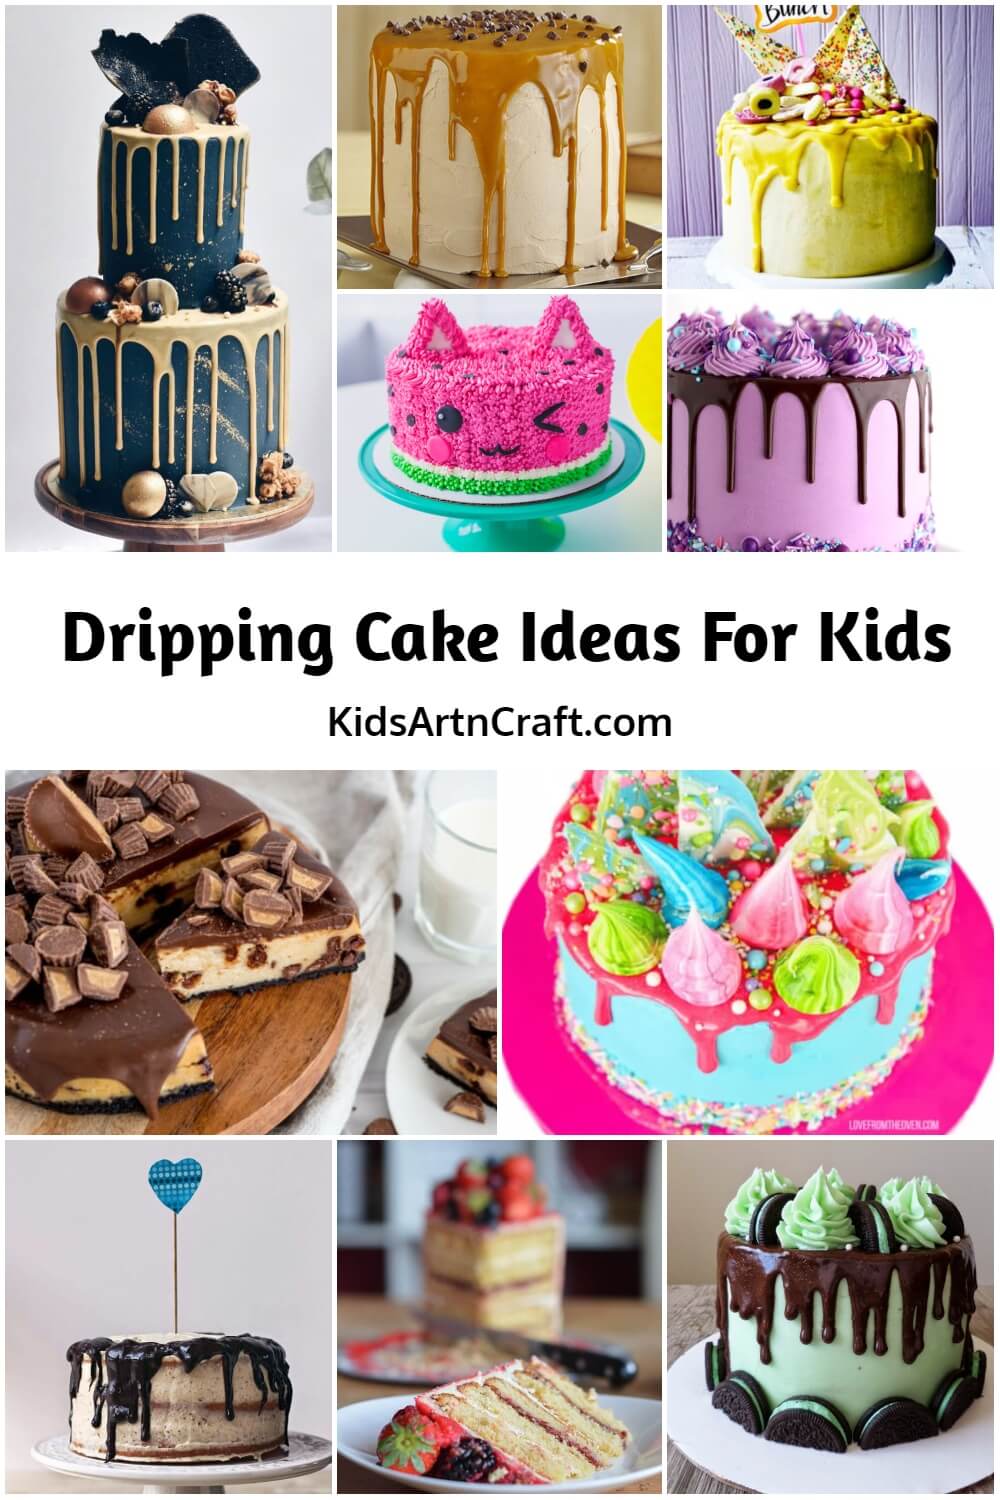 Dripping Cake Ideas for Kids